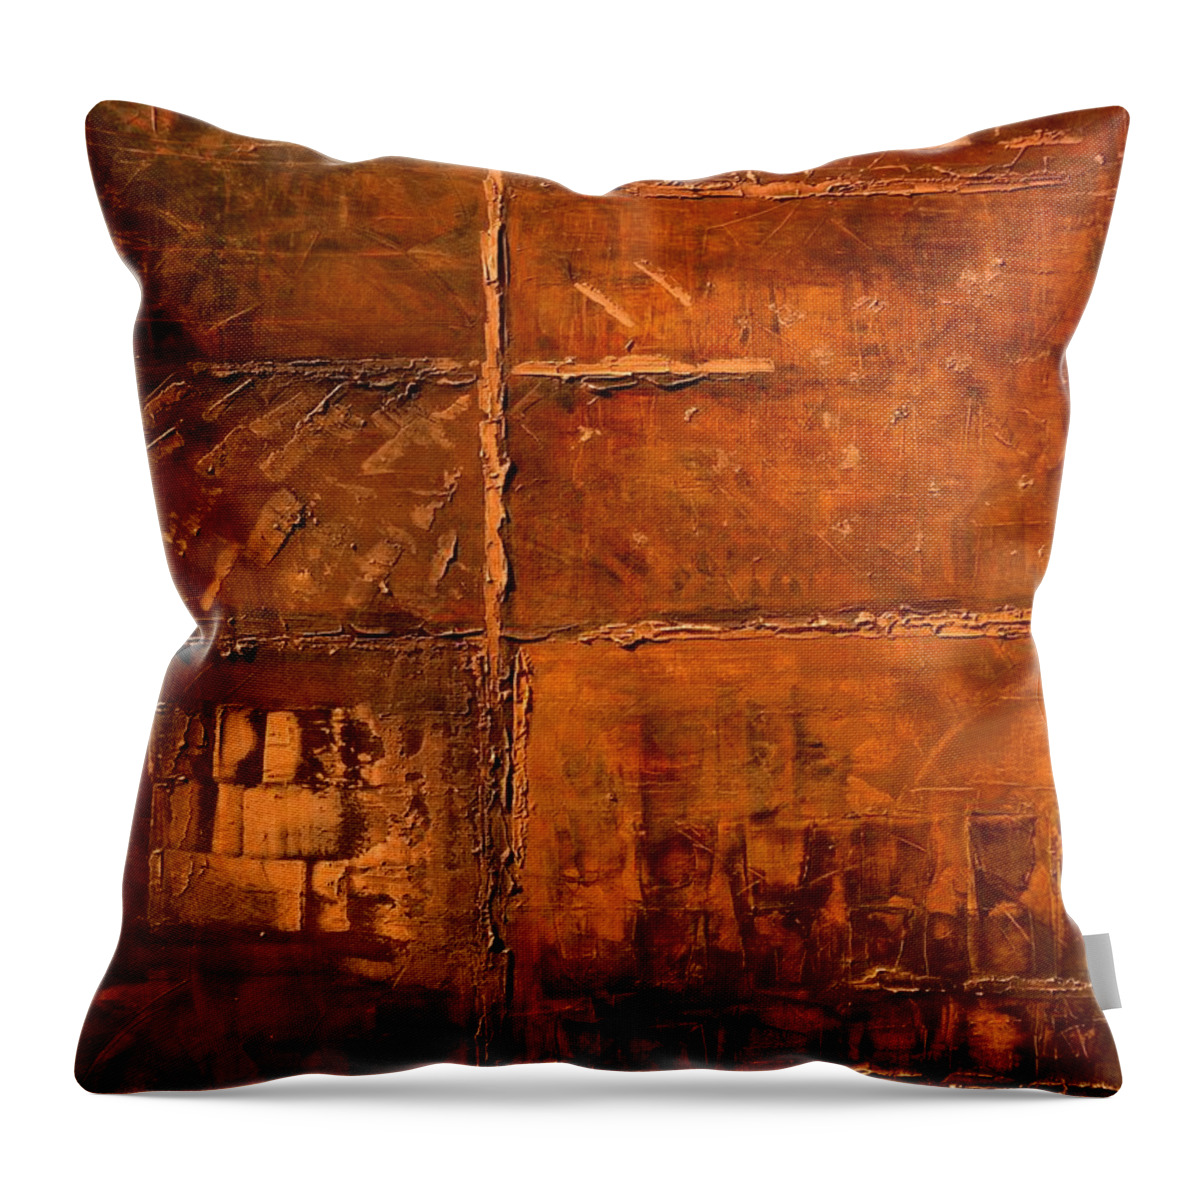 Rugged Cross Throw Pillow featuring the painting Rugged Cross by Linda Bailey